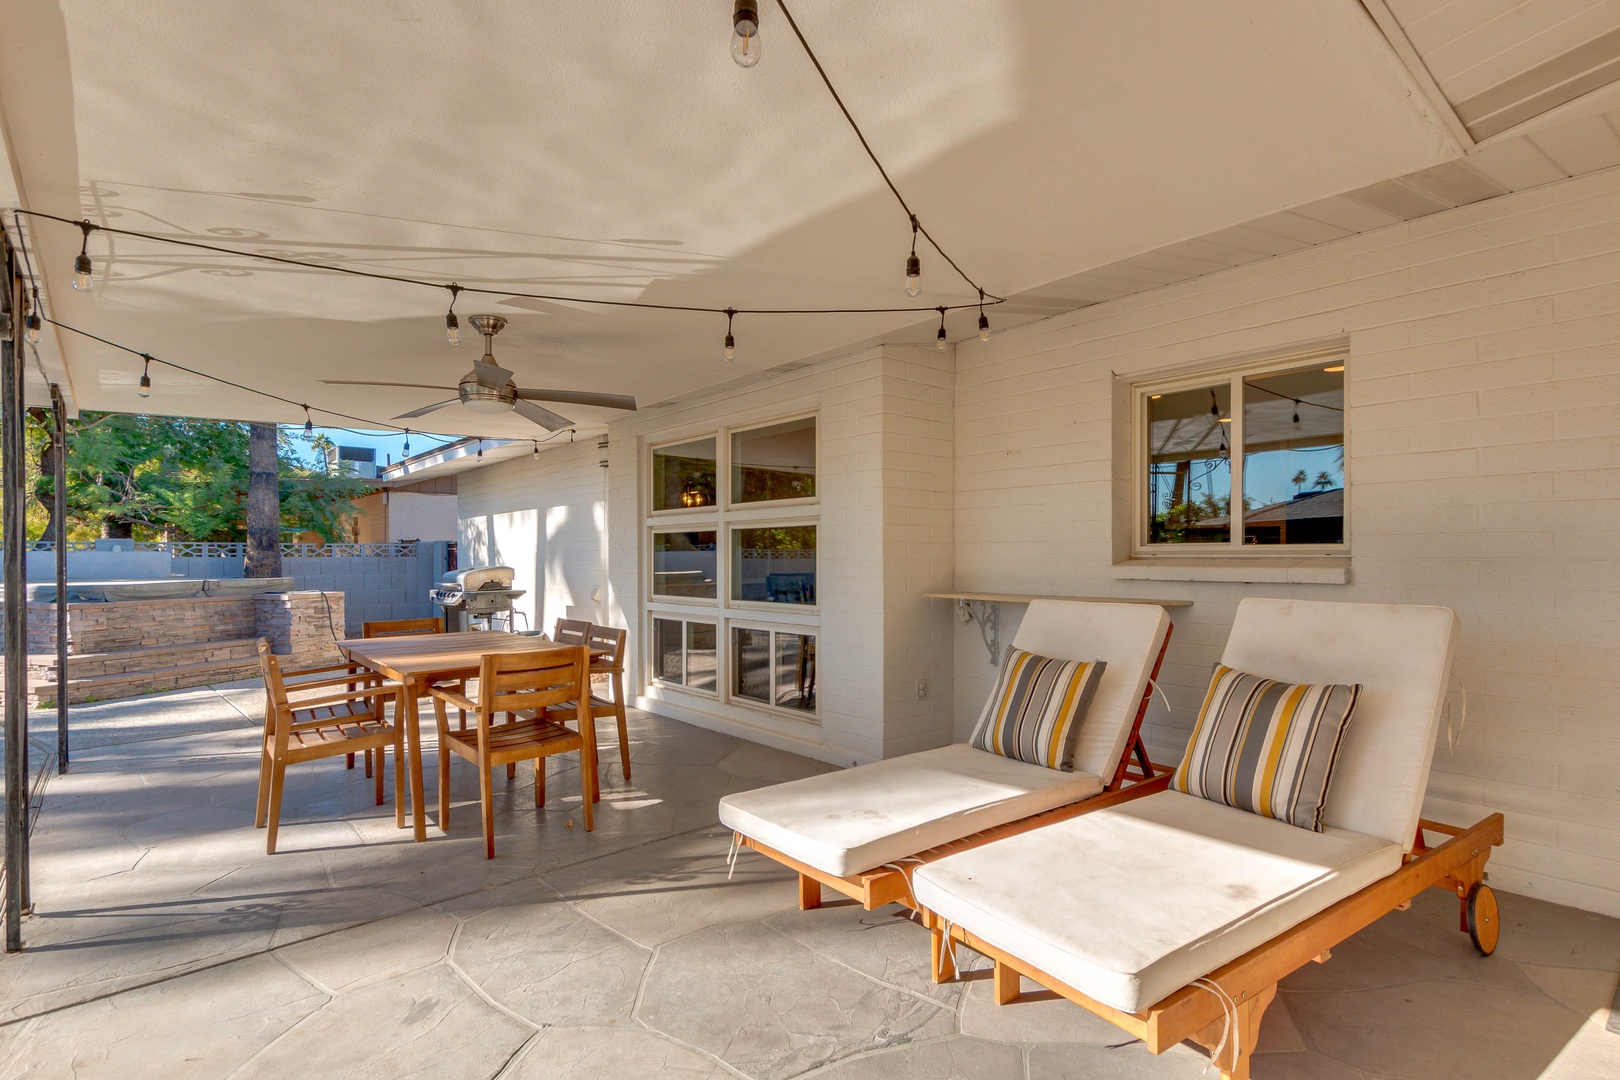 Spacious covered patio with loungers and table. Pool and hot tub in the back.